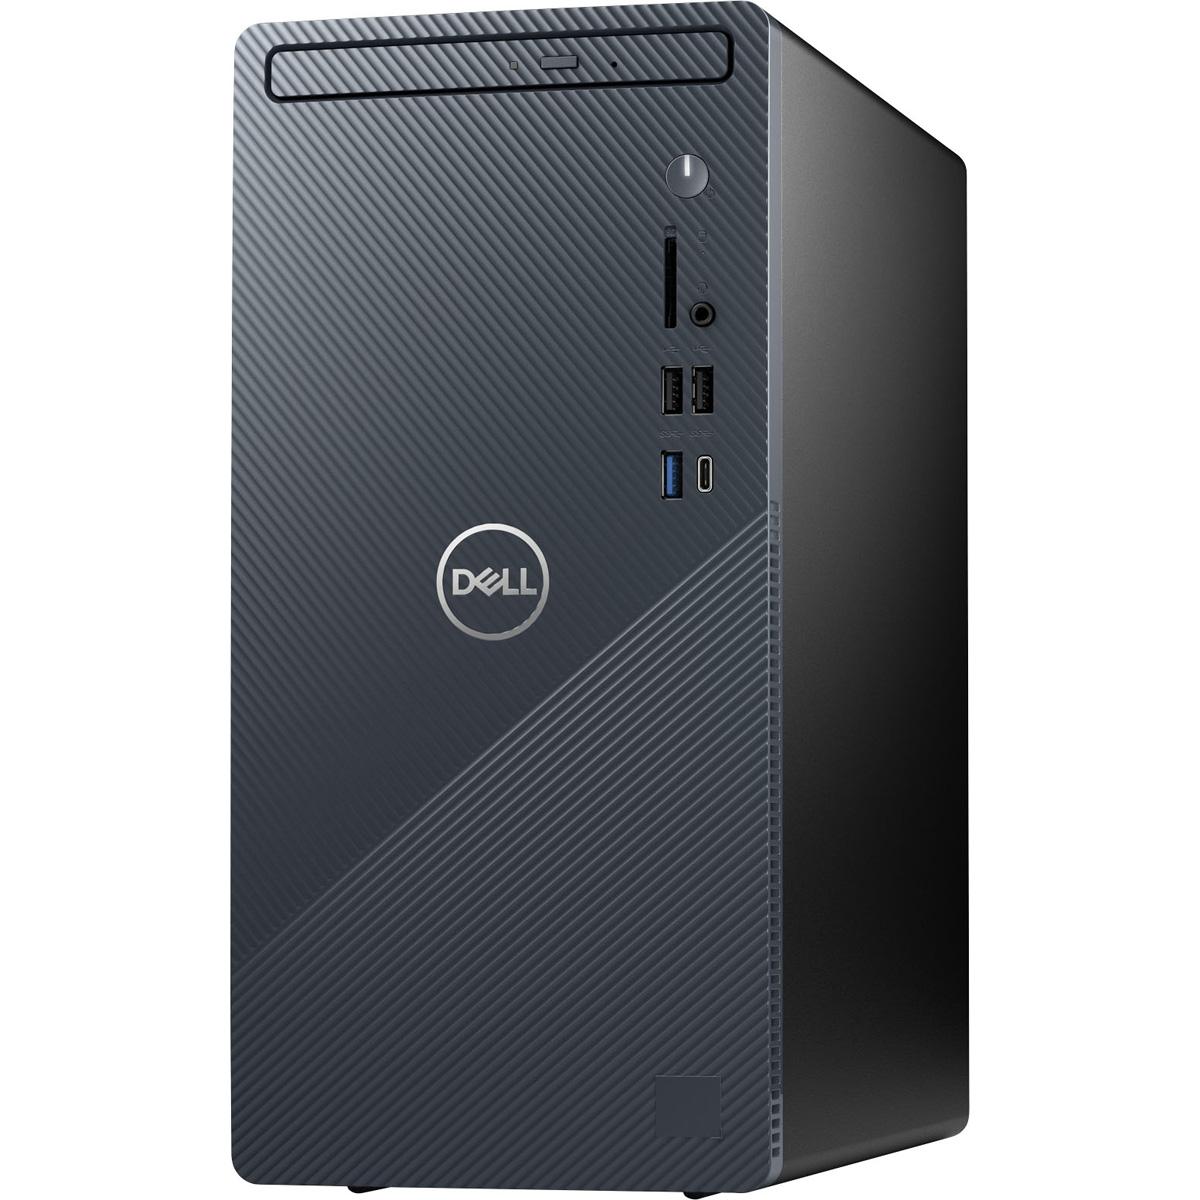 Dell Inspiron 3910 i5 8GB 256GB Compact Desktop Computer for $489.99 Shipped